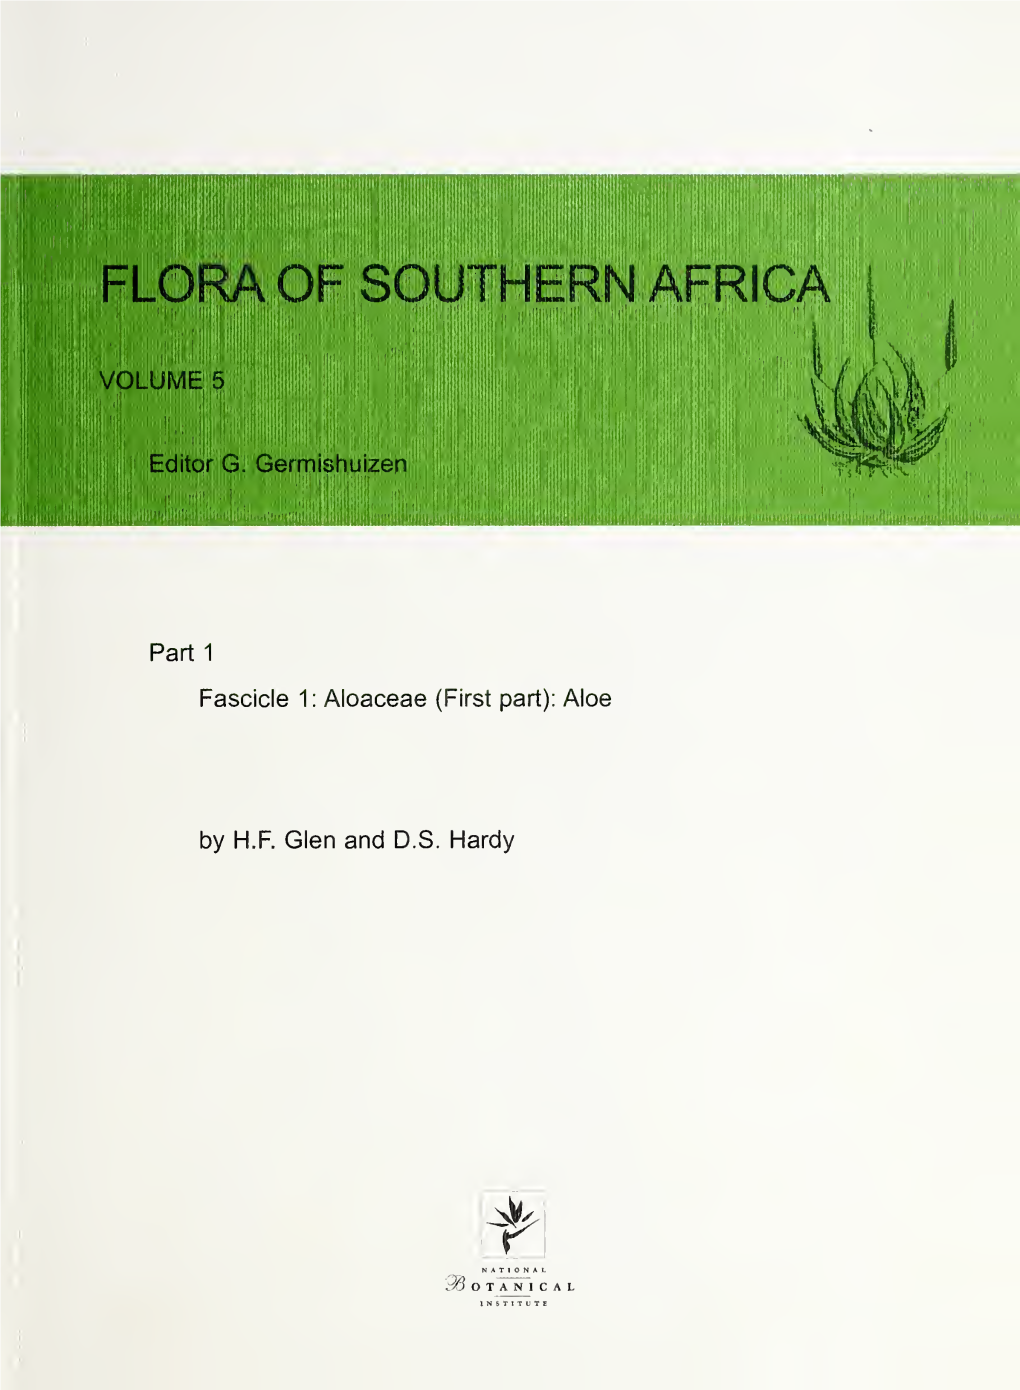 Flora of Southern Africa, Which Deals with the Territories of South